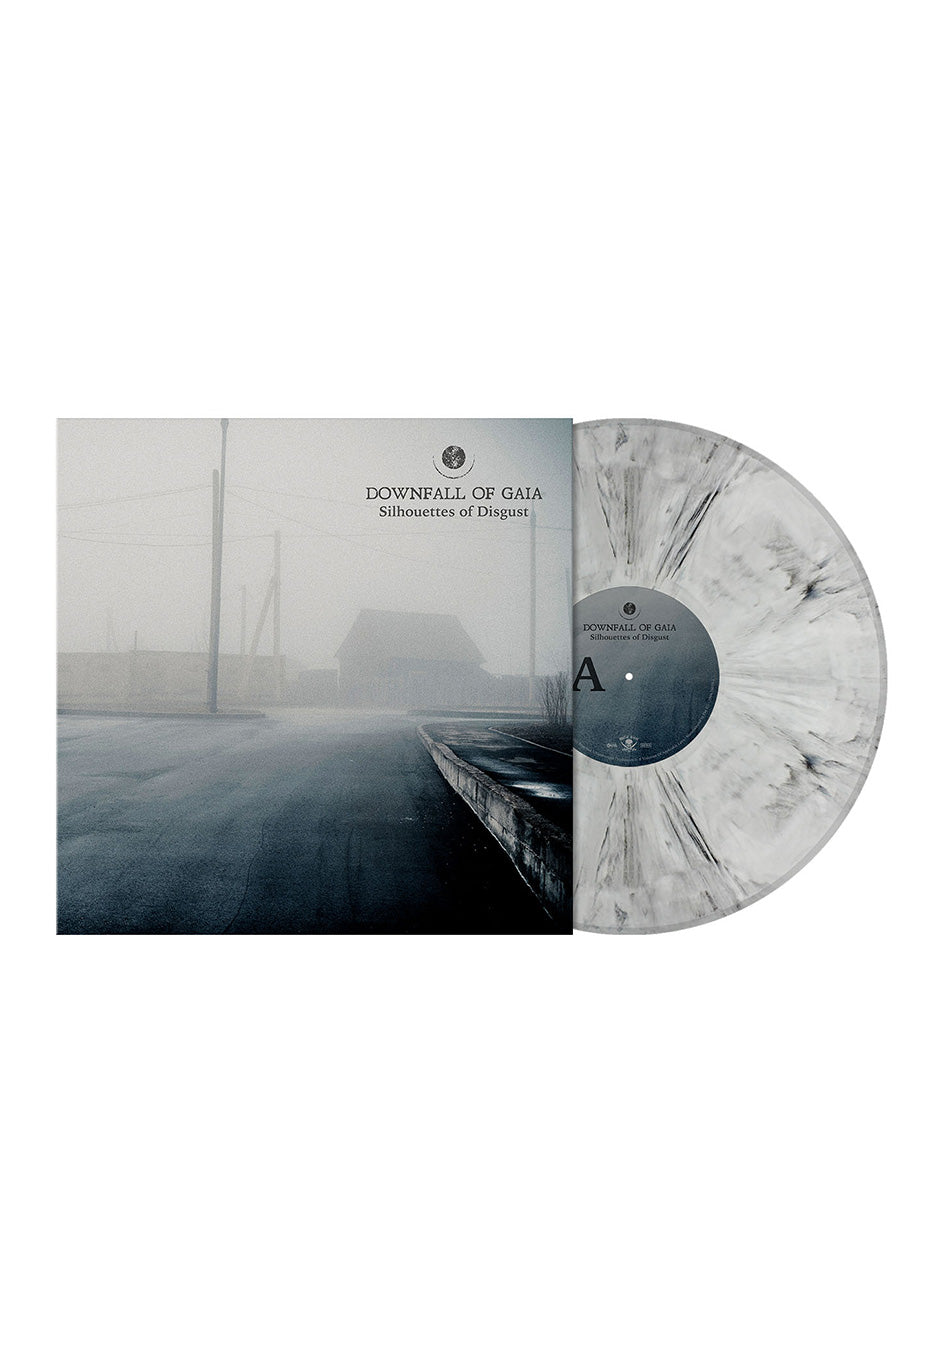 Downfall Of Gaia - Silhouettes Of Disgust Ltd. White Black - Marbled Vinyl